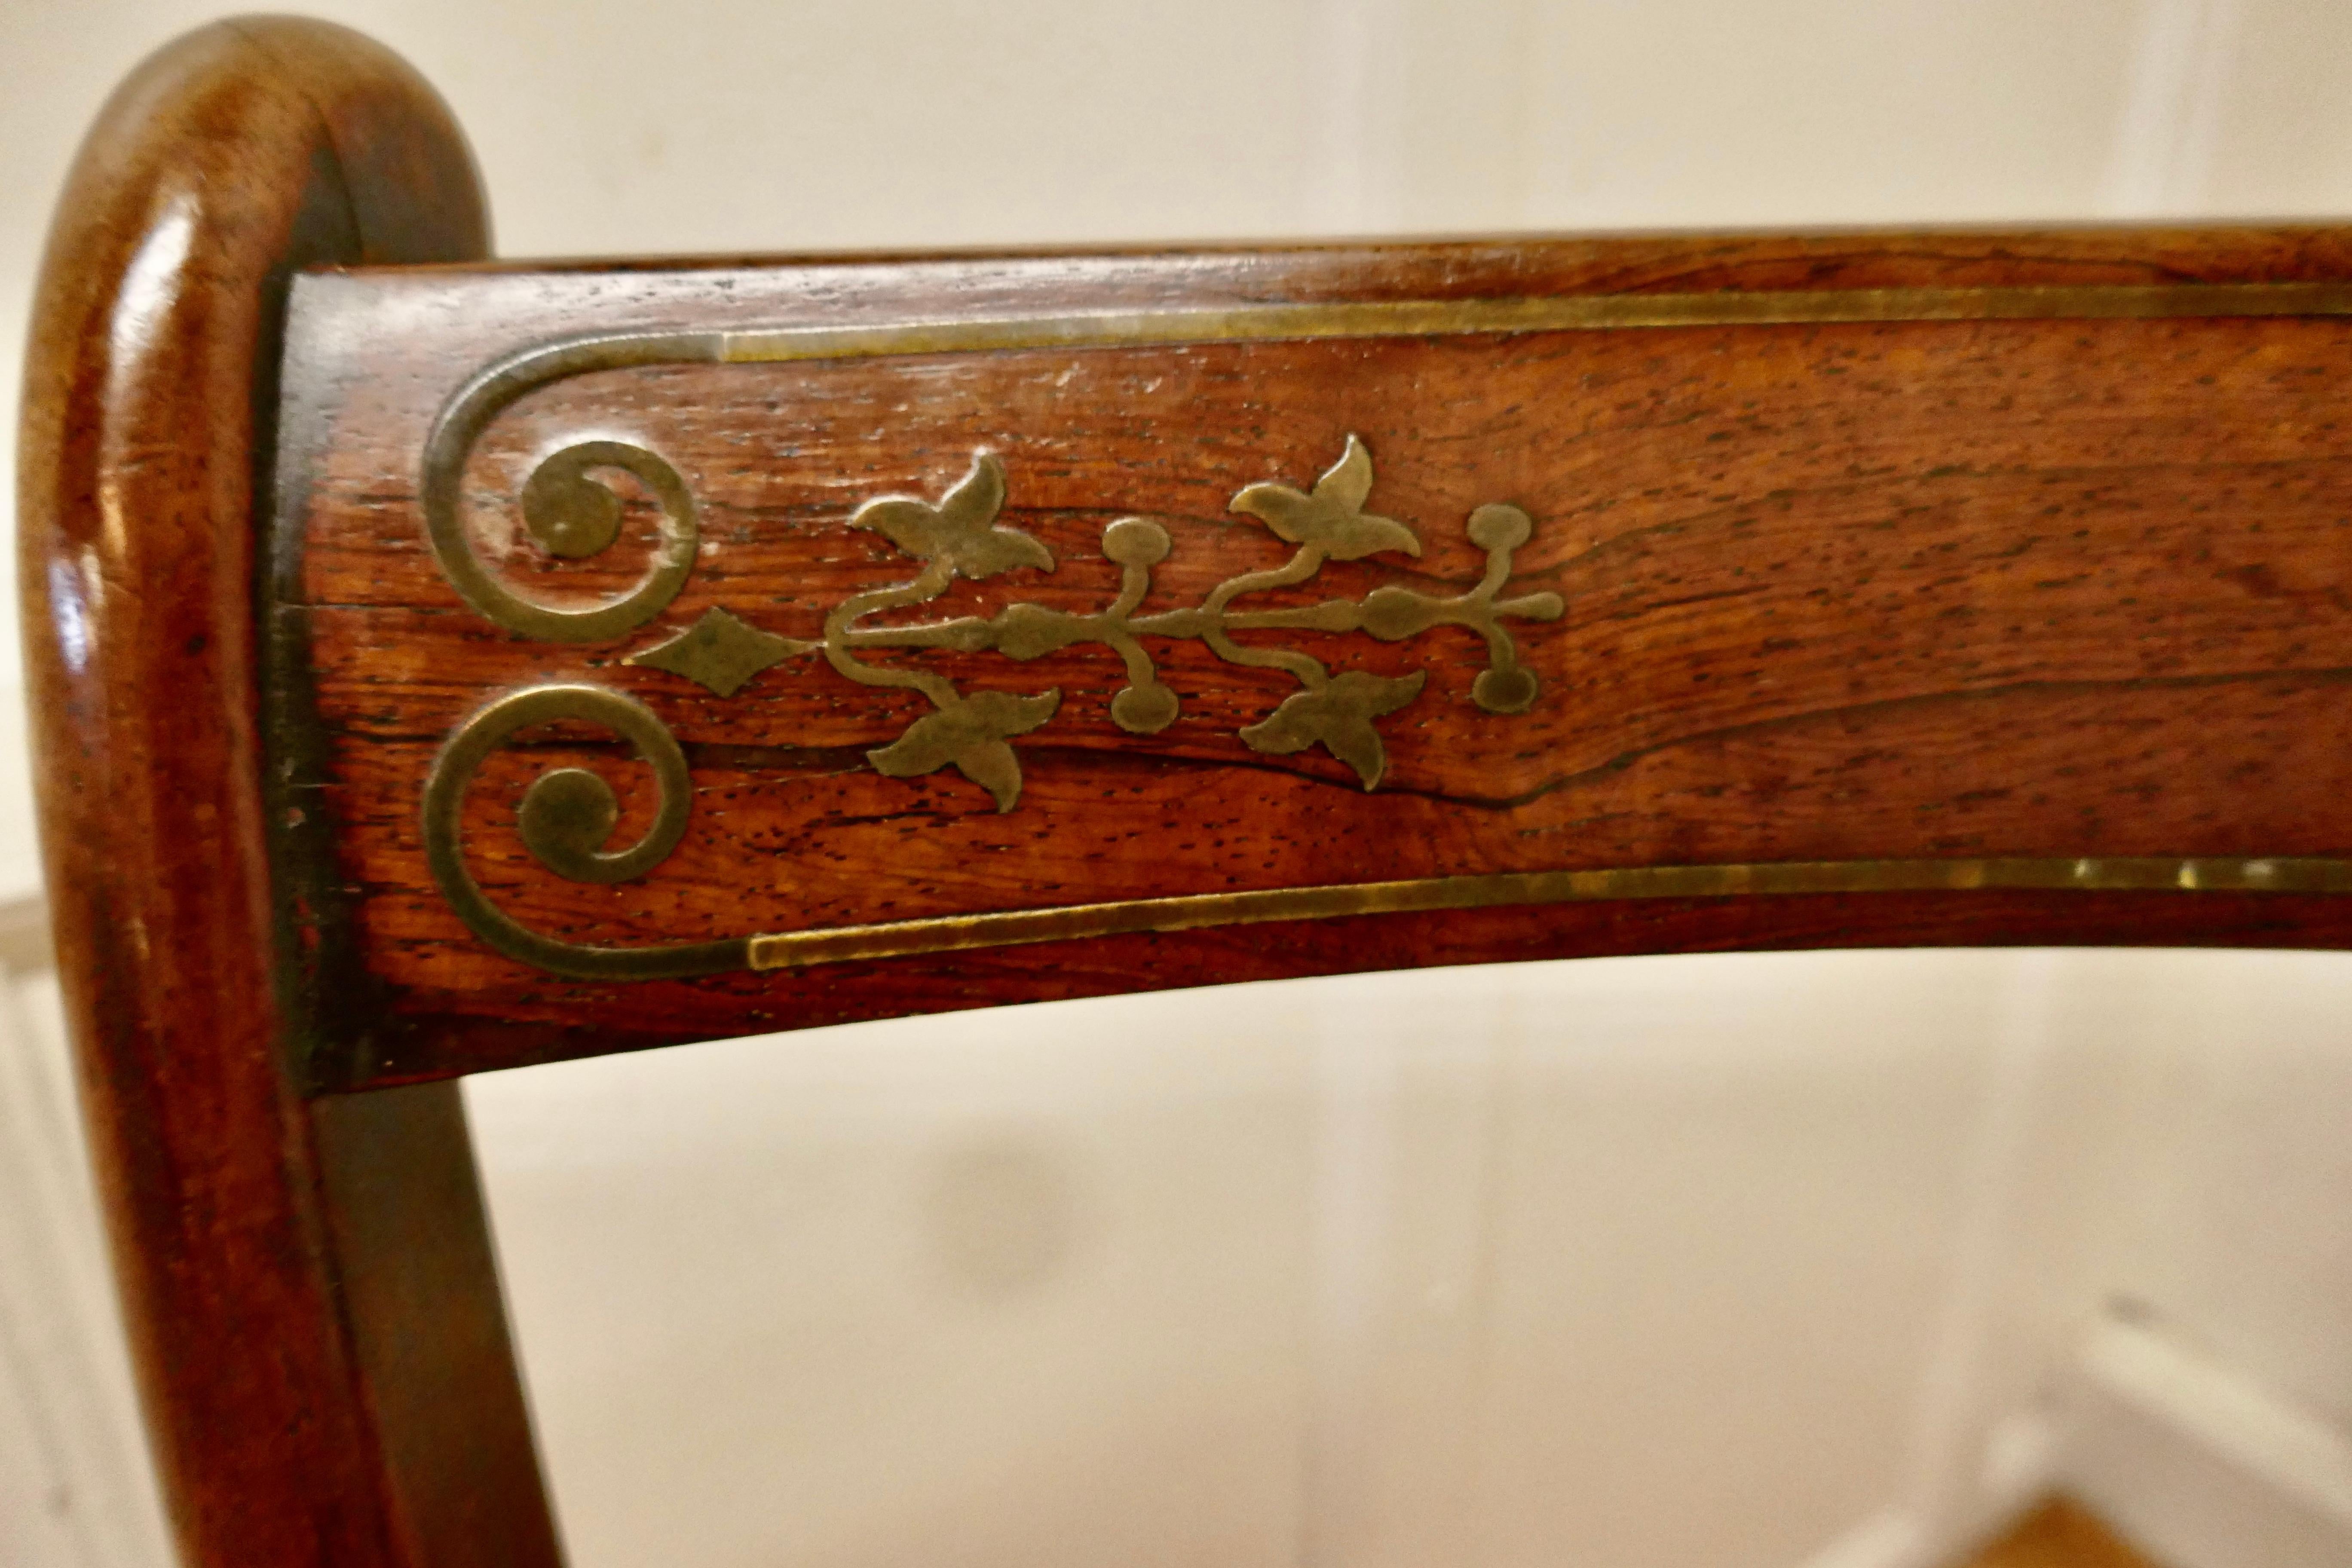 Regency Desk Chair with Brass Inlay Decoration In Good Condition For Sale In Chillerton, Isle of Wight